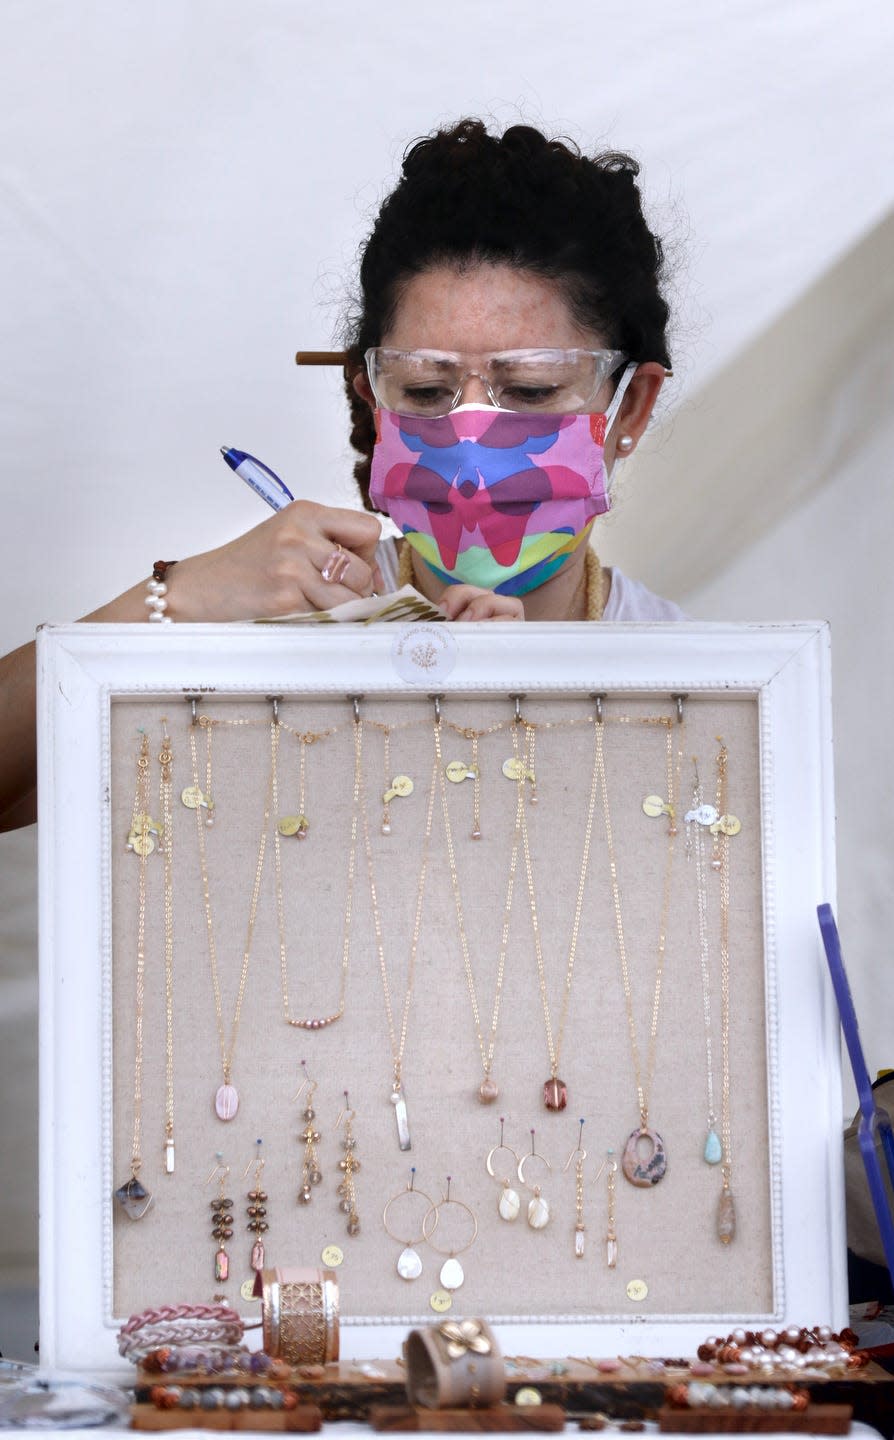 Jewelry maker Mildred Cortez of Bare Hand Creations finishes up with a customer's request at her tent at the Providence Flea on Sunday afternoon.